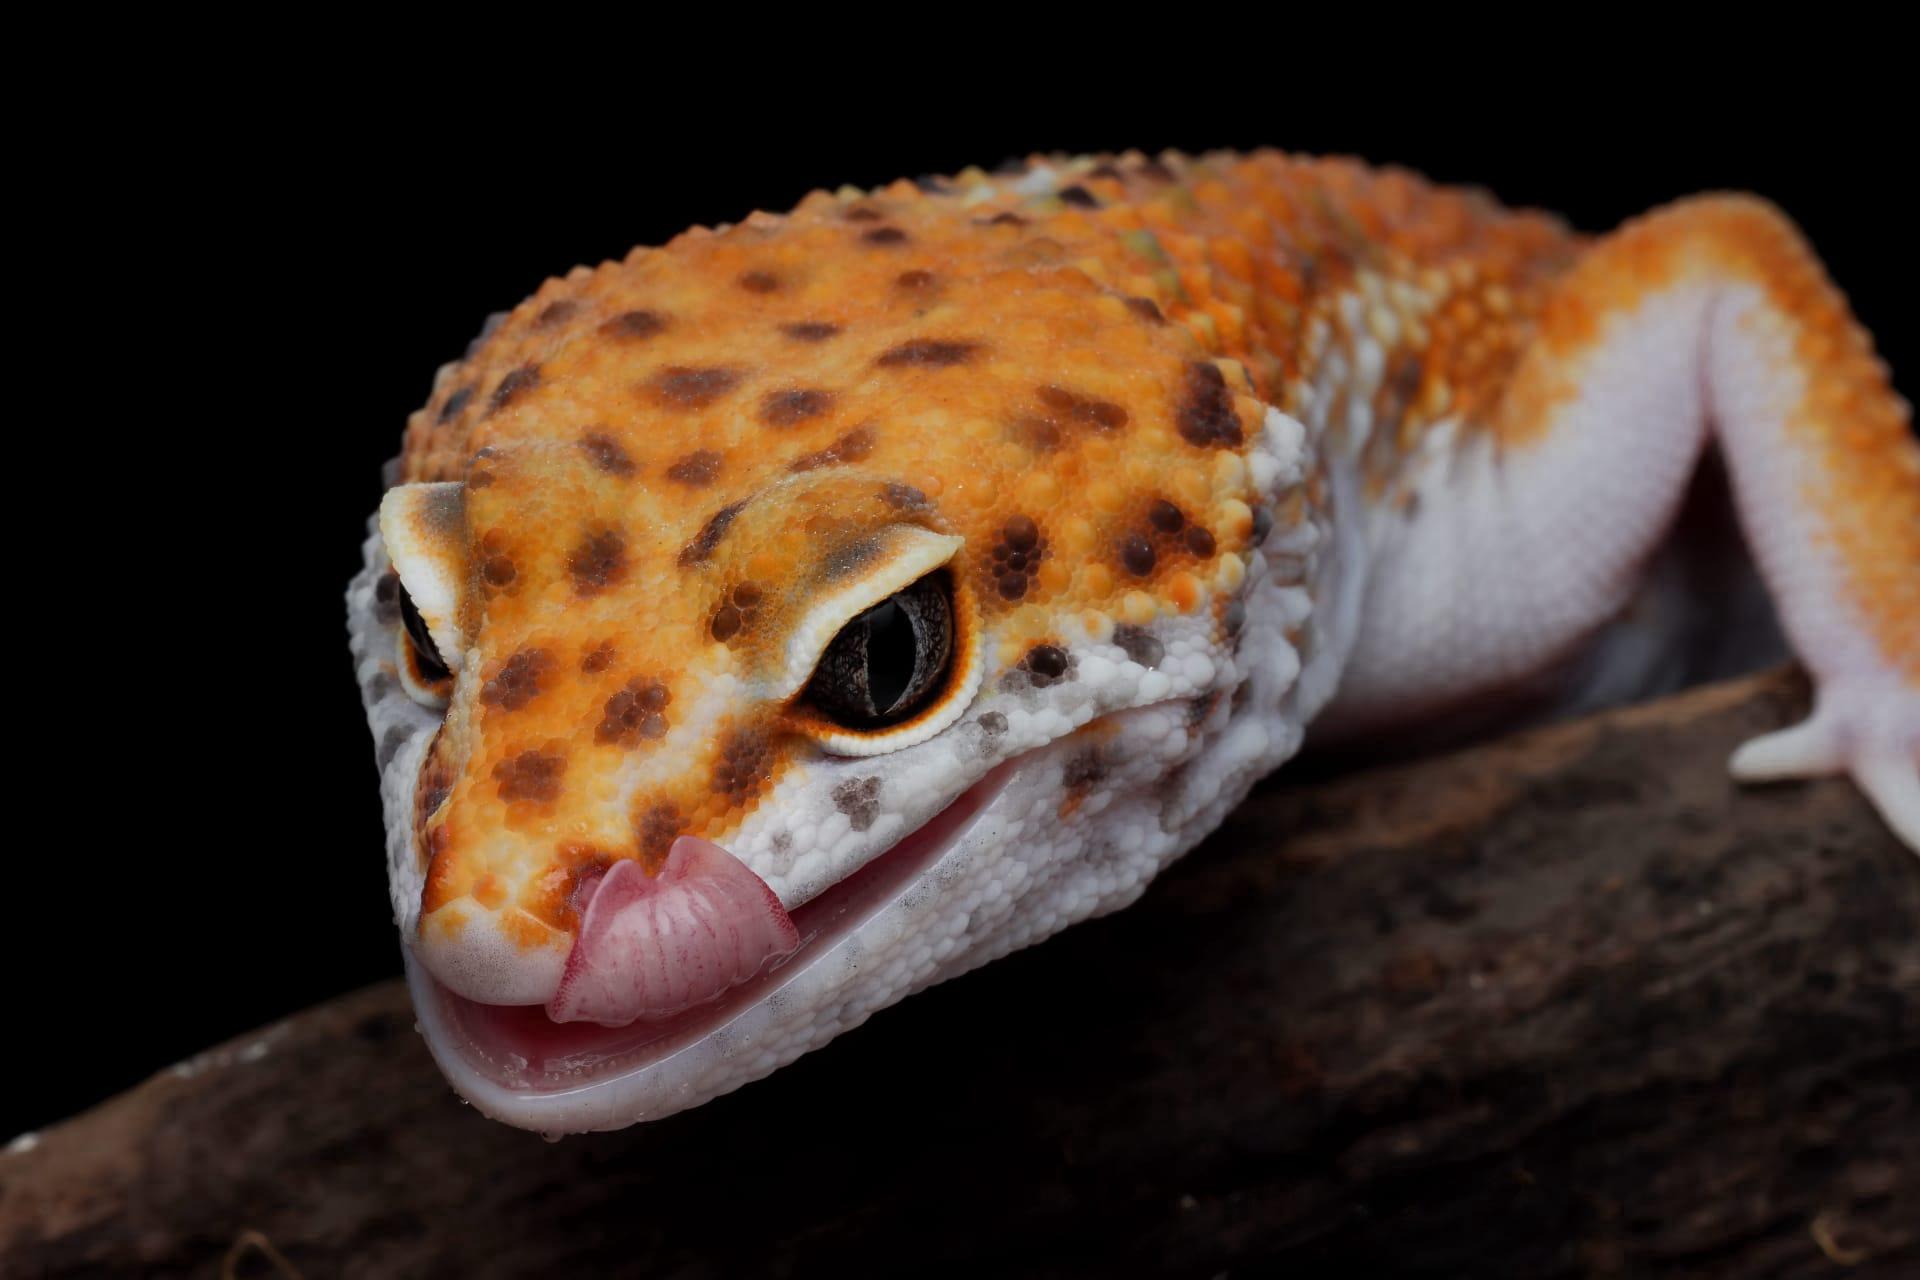 Gecko pictures